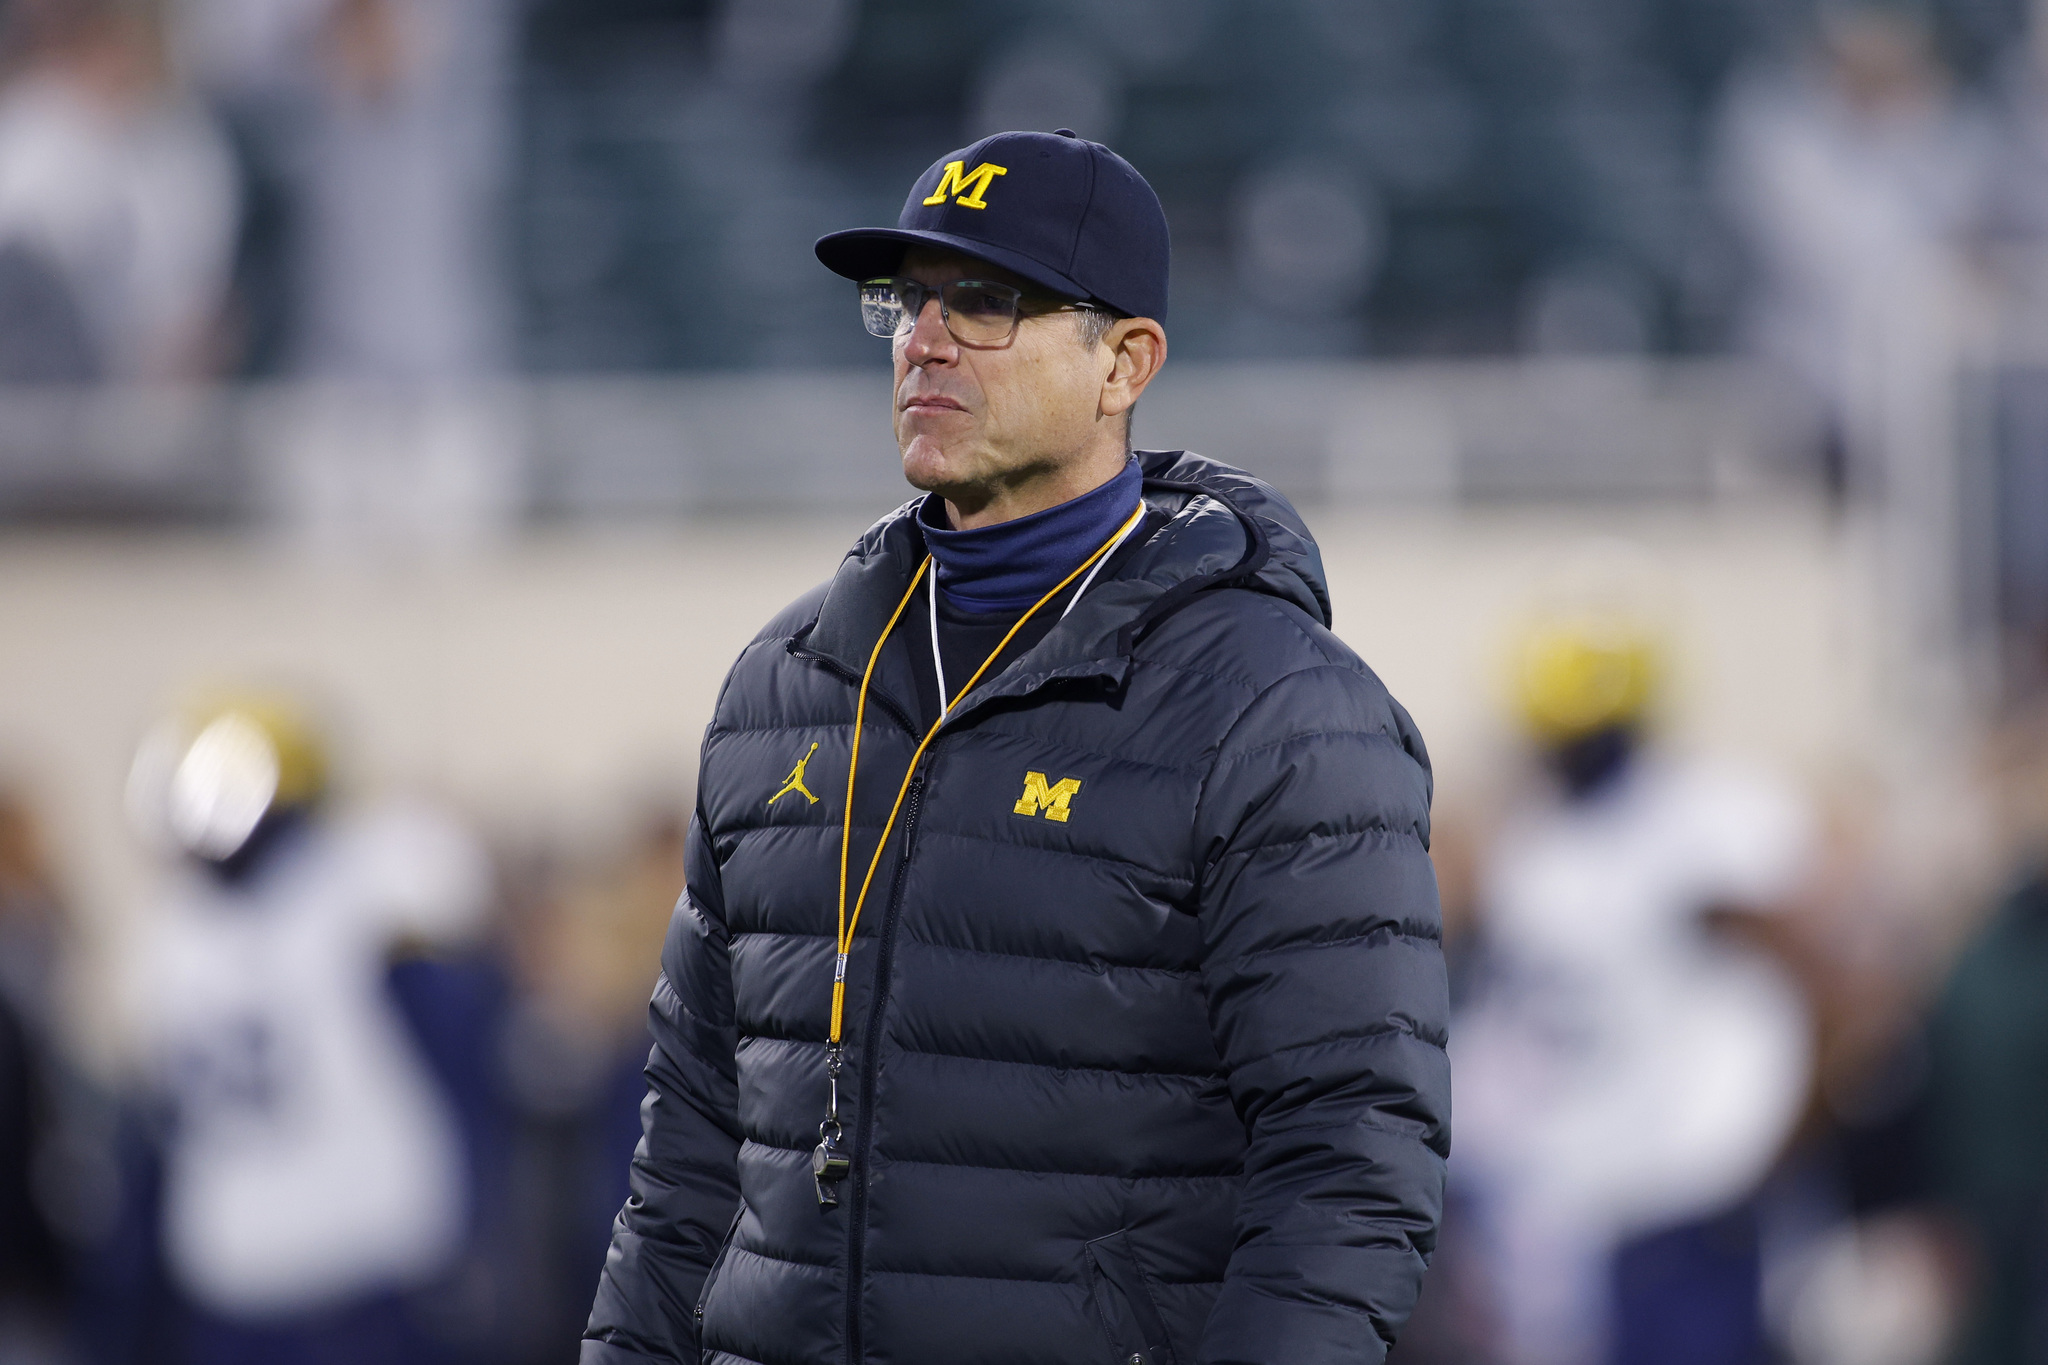 Jim Harbaugh was a victim of sign stealing himself, according to an anonymous 'Big-Ten' source.